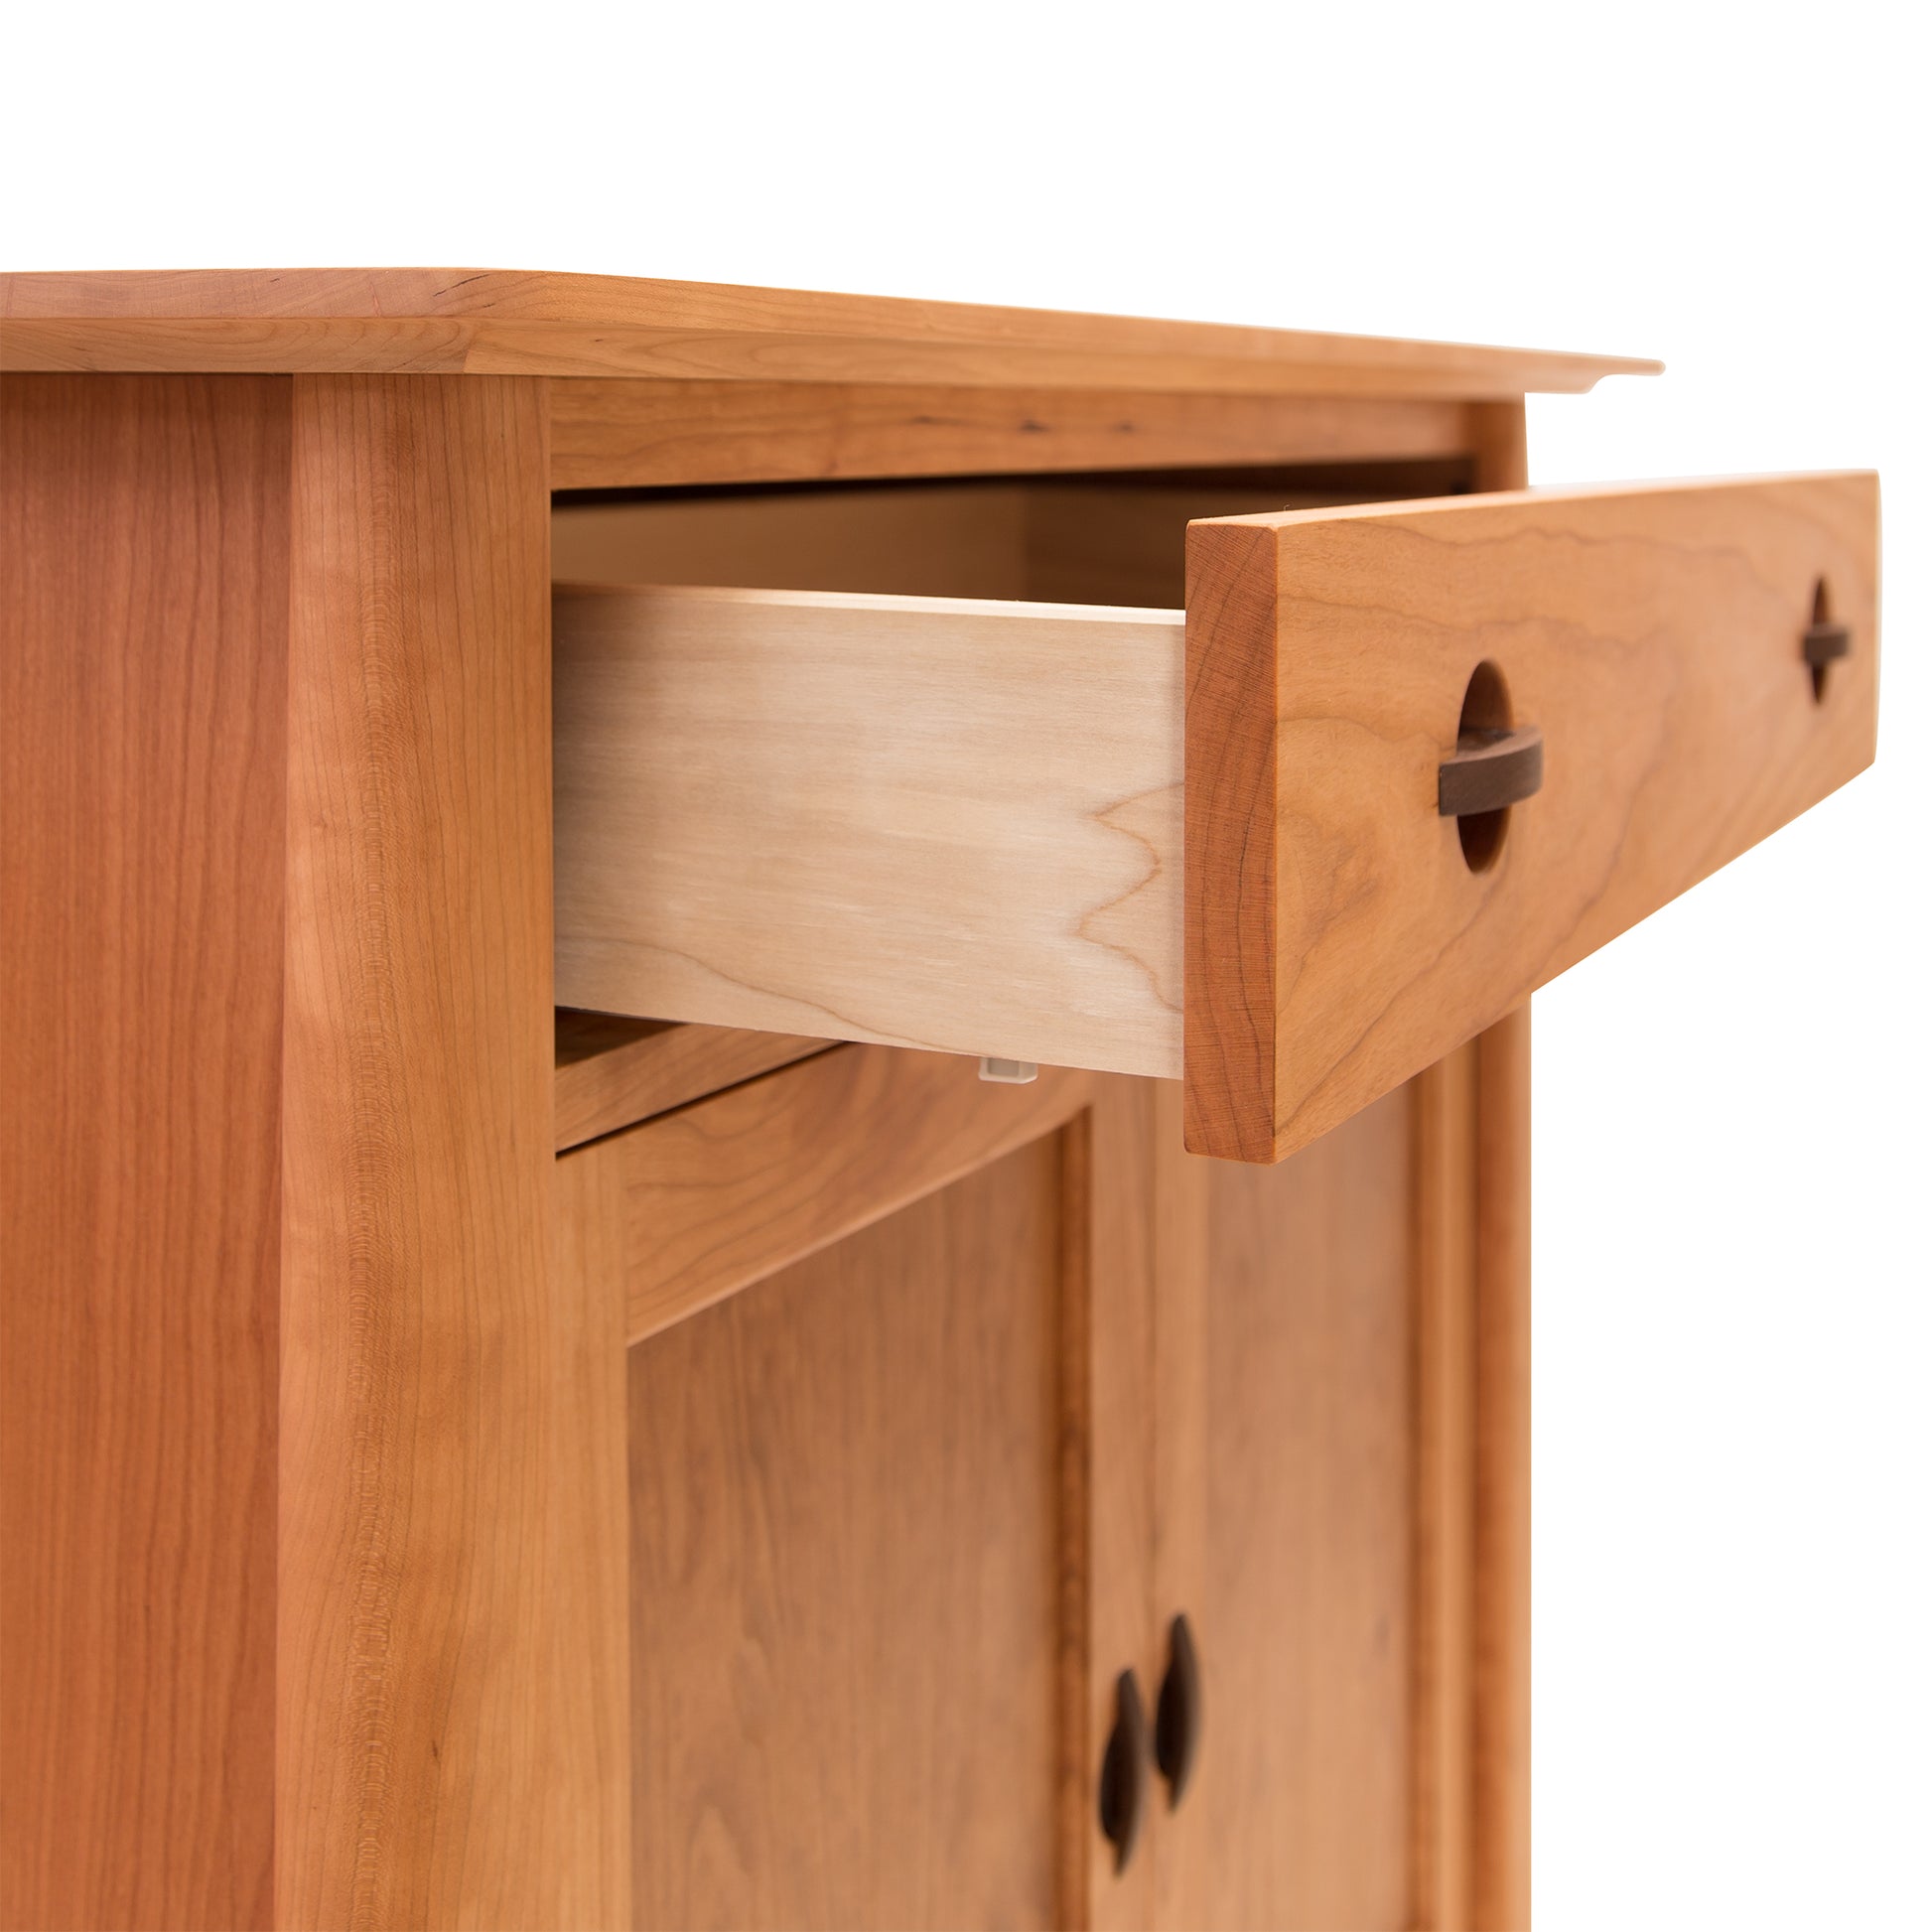 Solid hardwood Cherry Moon Small 38" Sideboard with an open drawer showing the interior structure, set against a plain white background. The drawer features a simple knob by Maple Corner Woodworks.